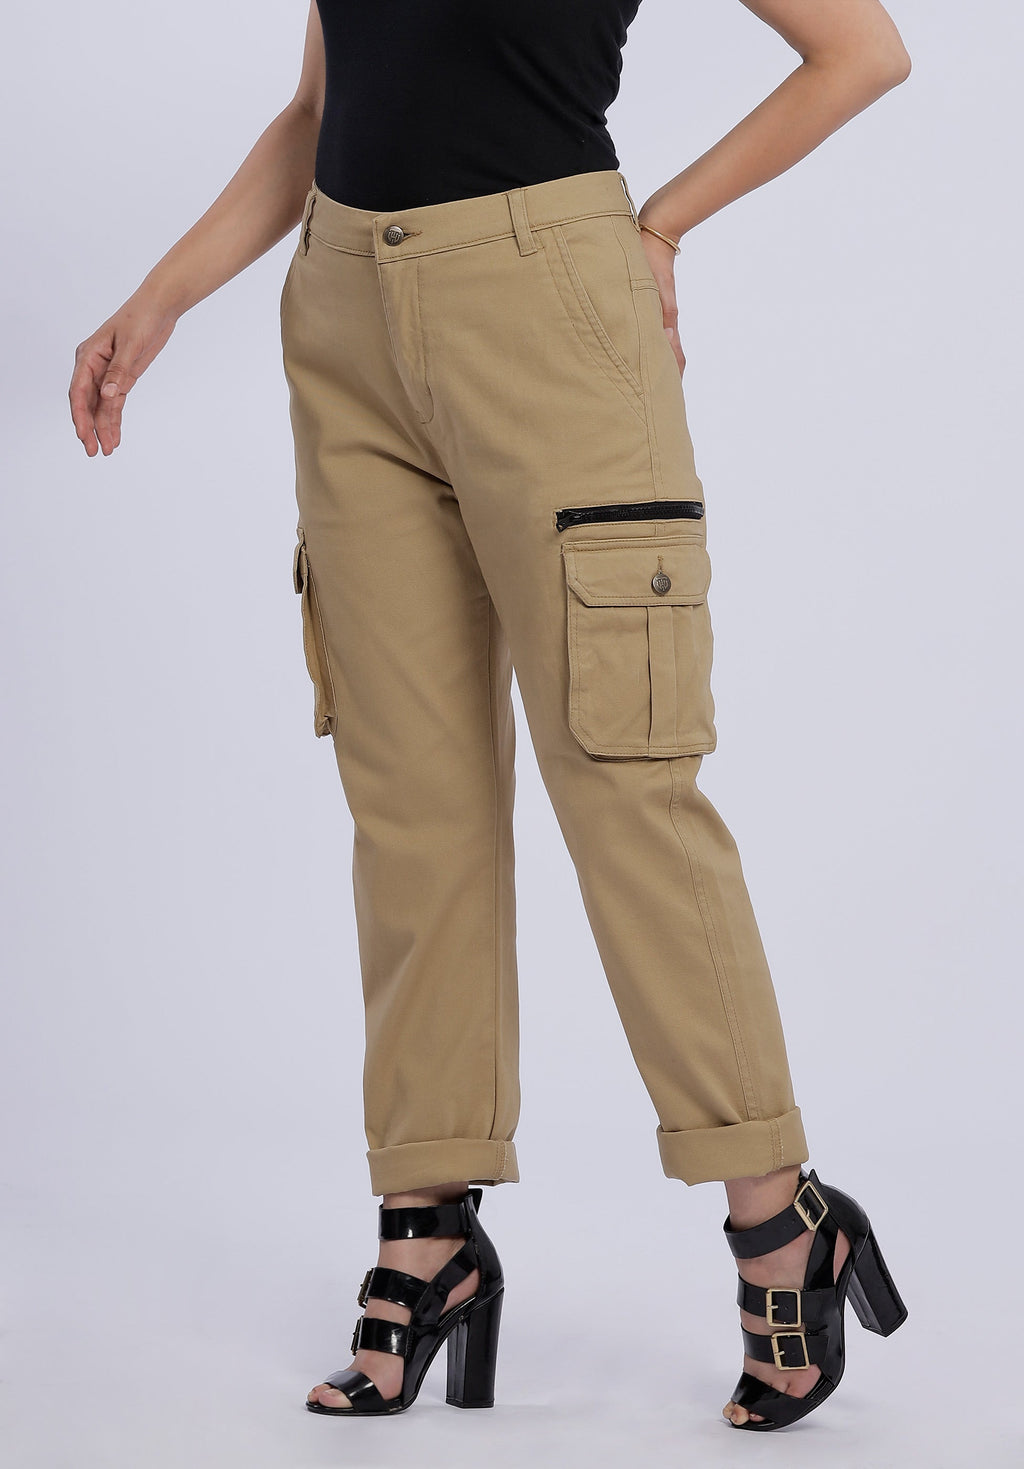 Tactical and Cargo pants for Women in Nepal – Harrington Nepal